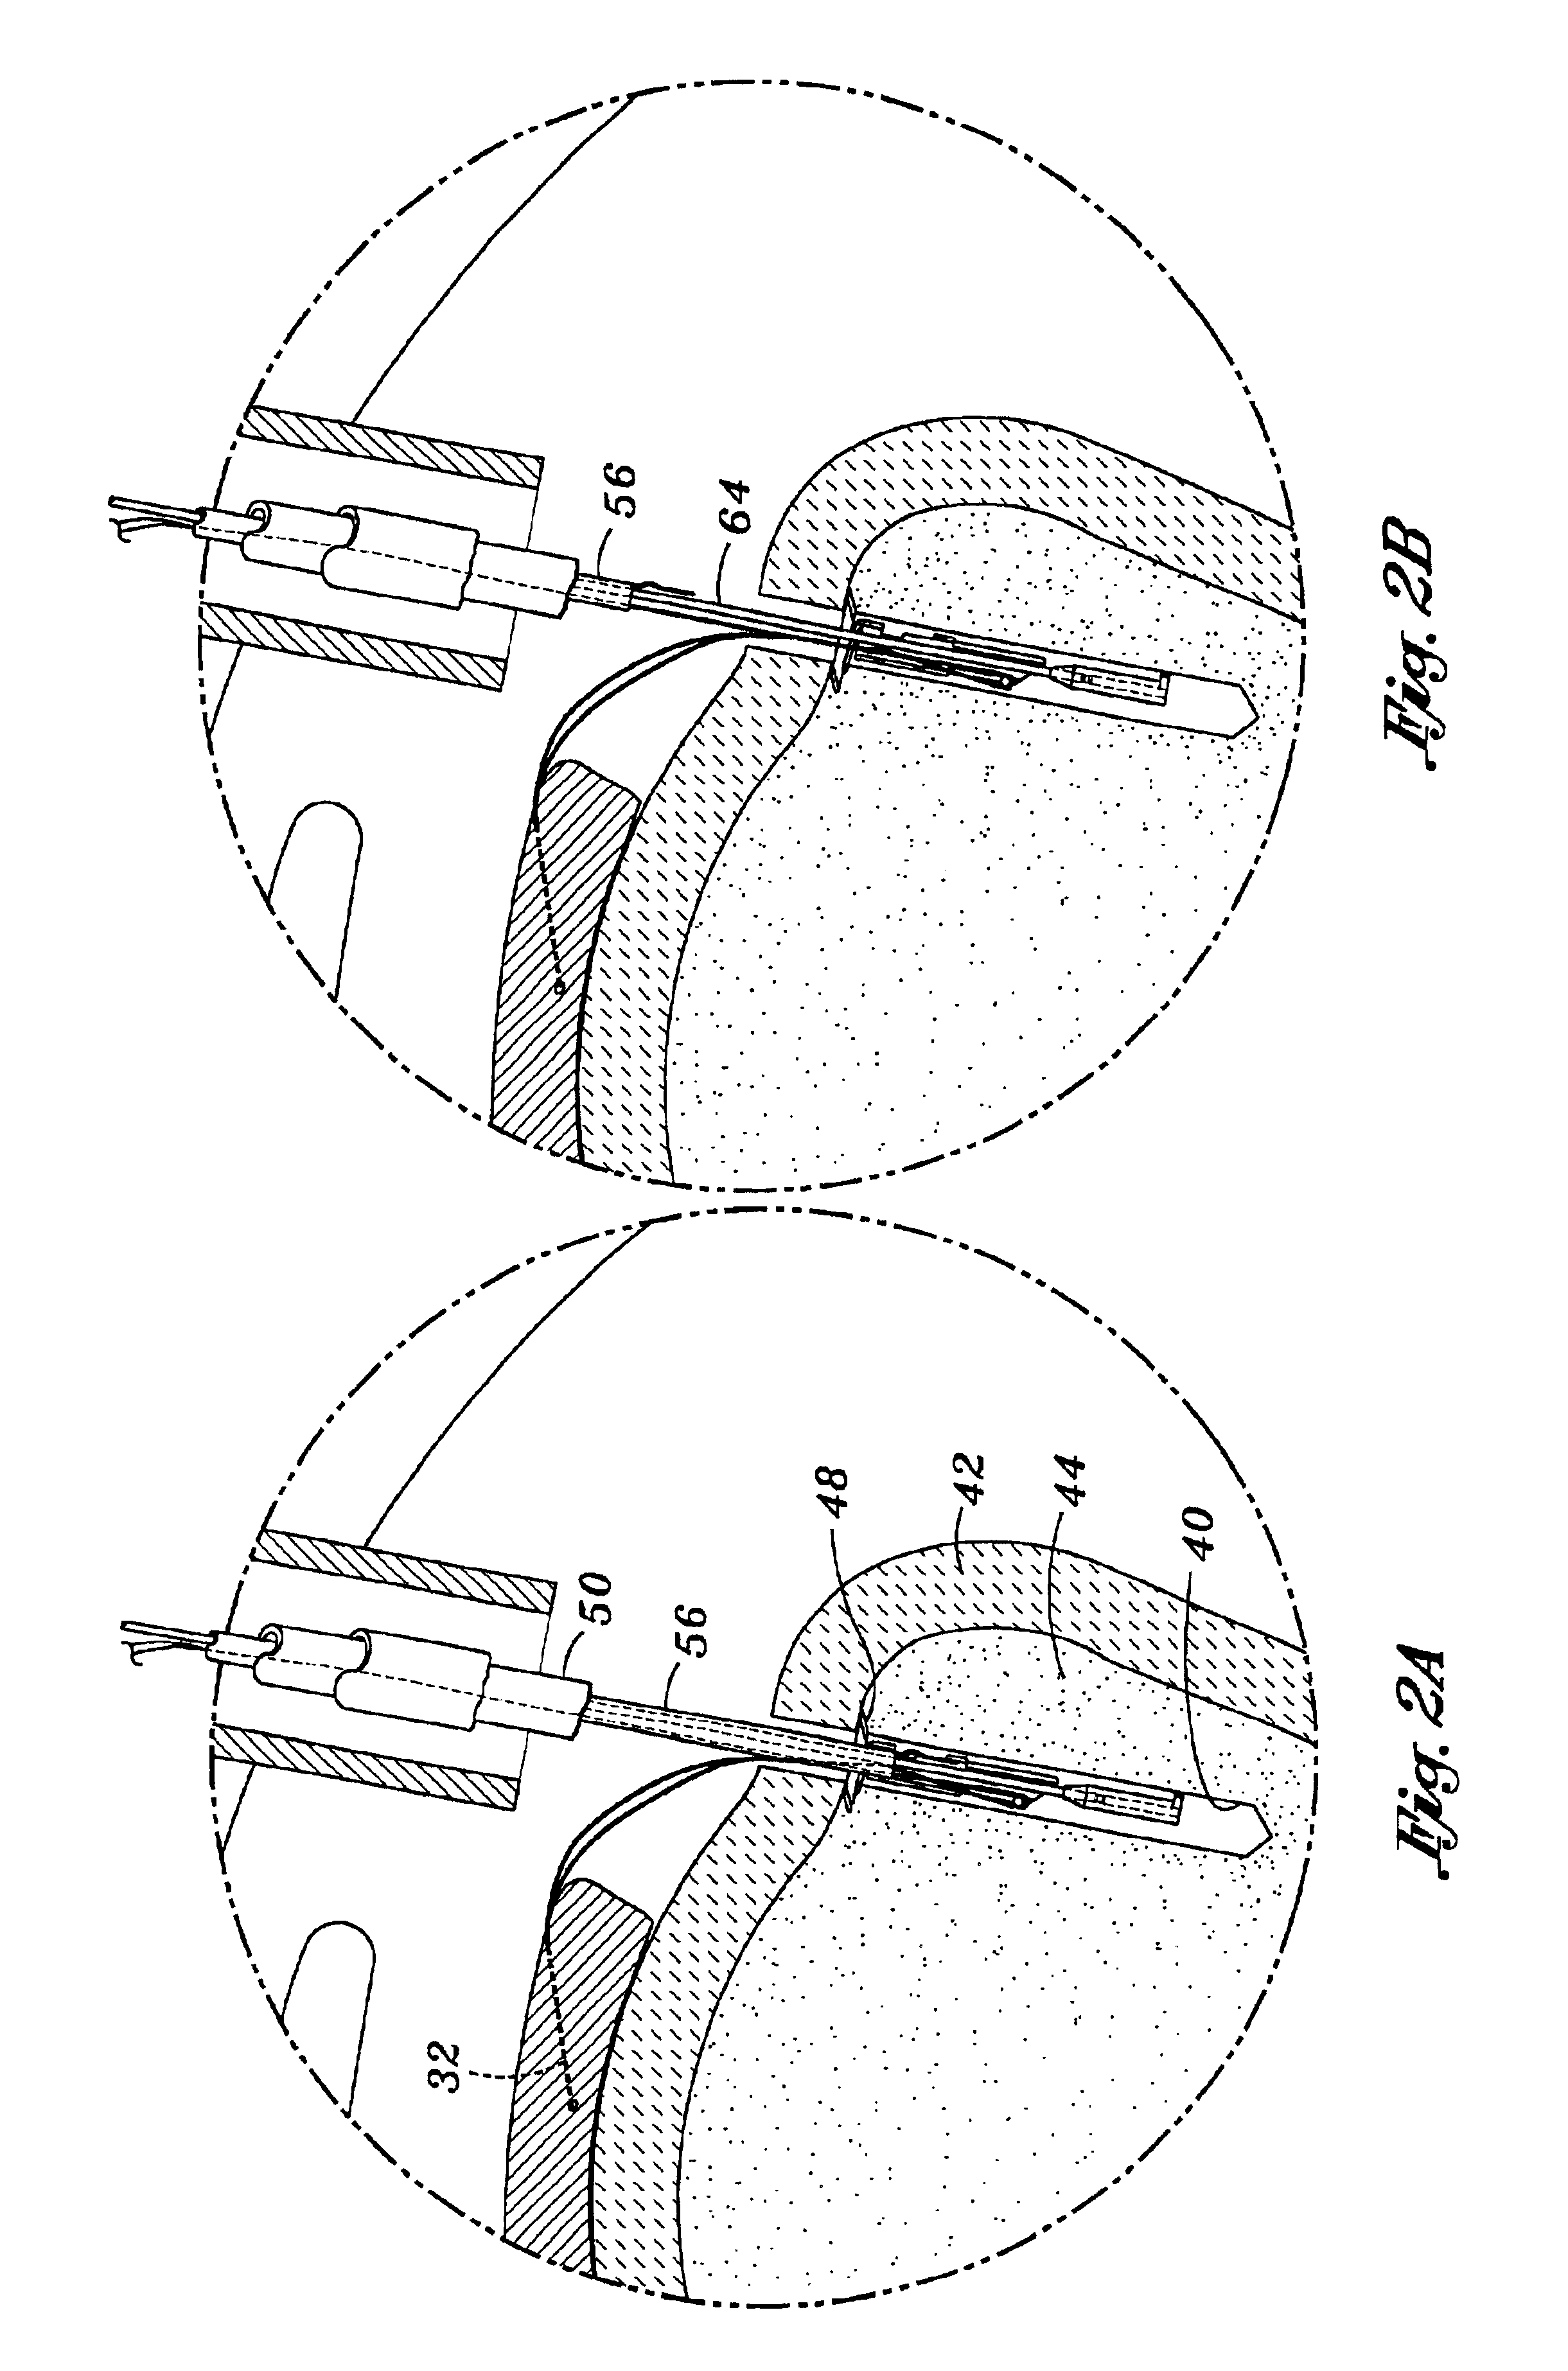 Method and apparatus for attaching connective tissues to bone using a knotless suture anchoring device